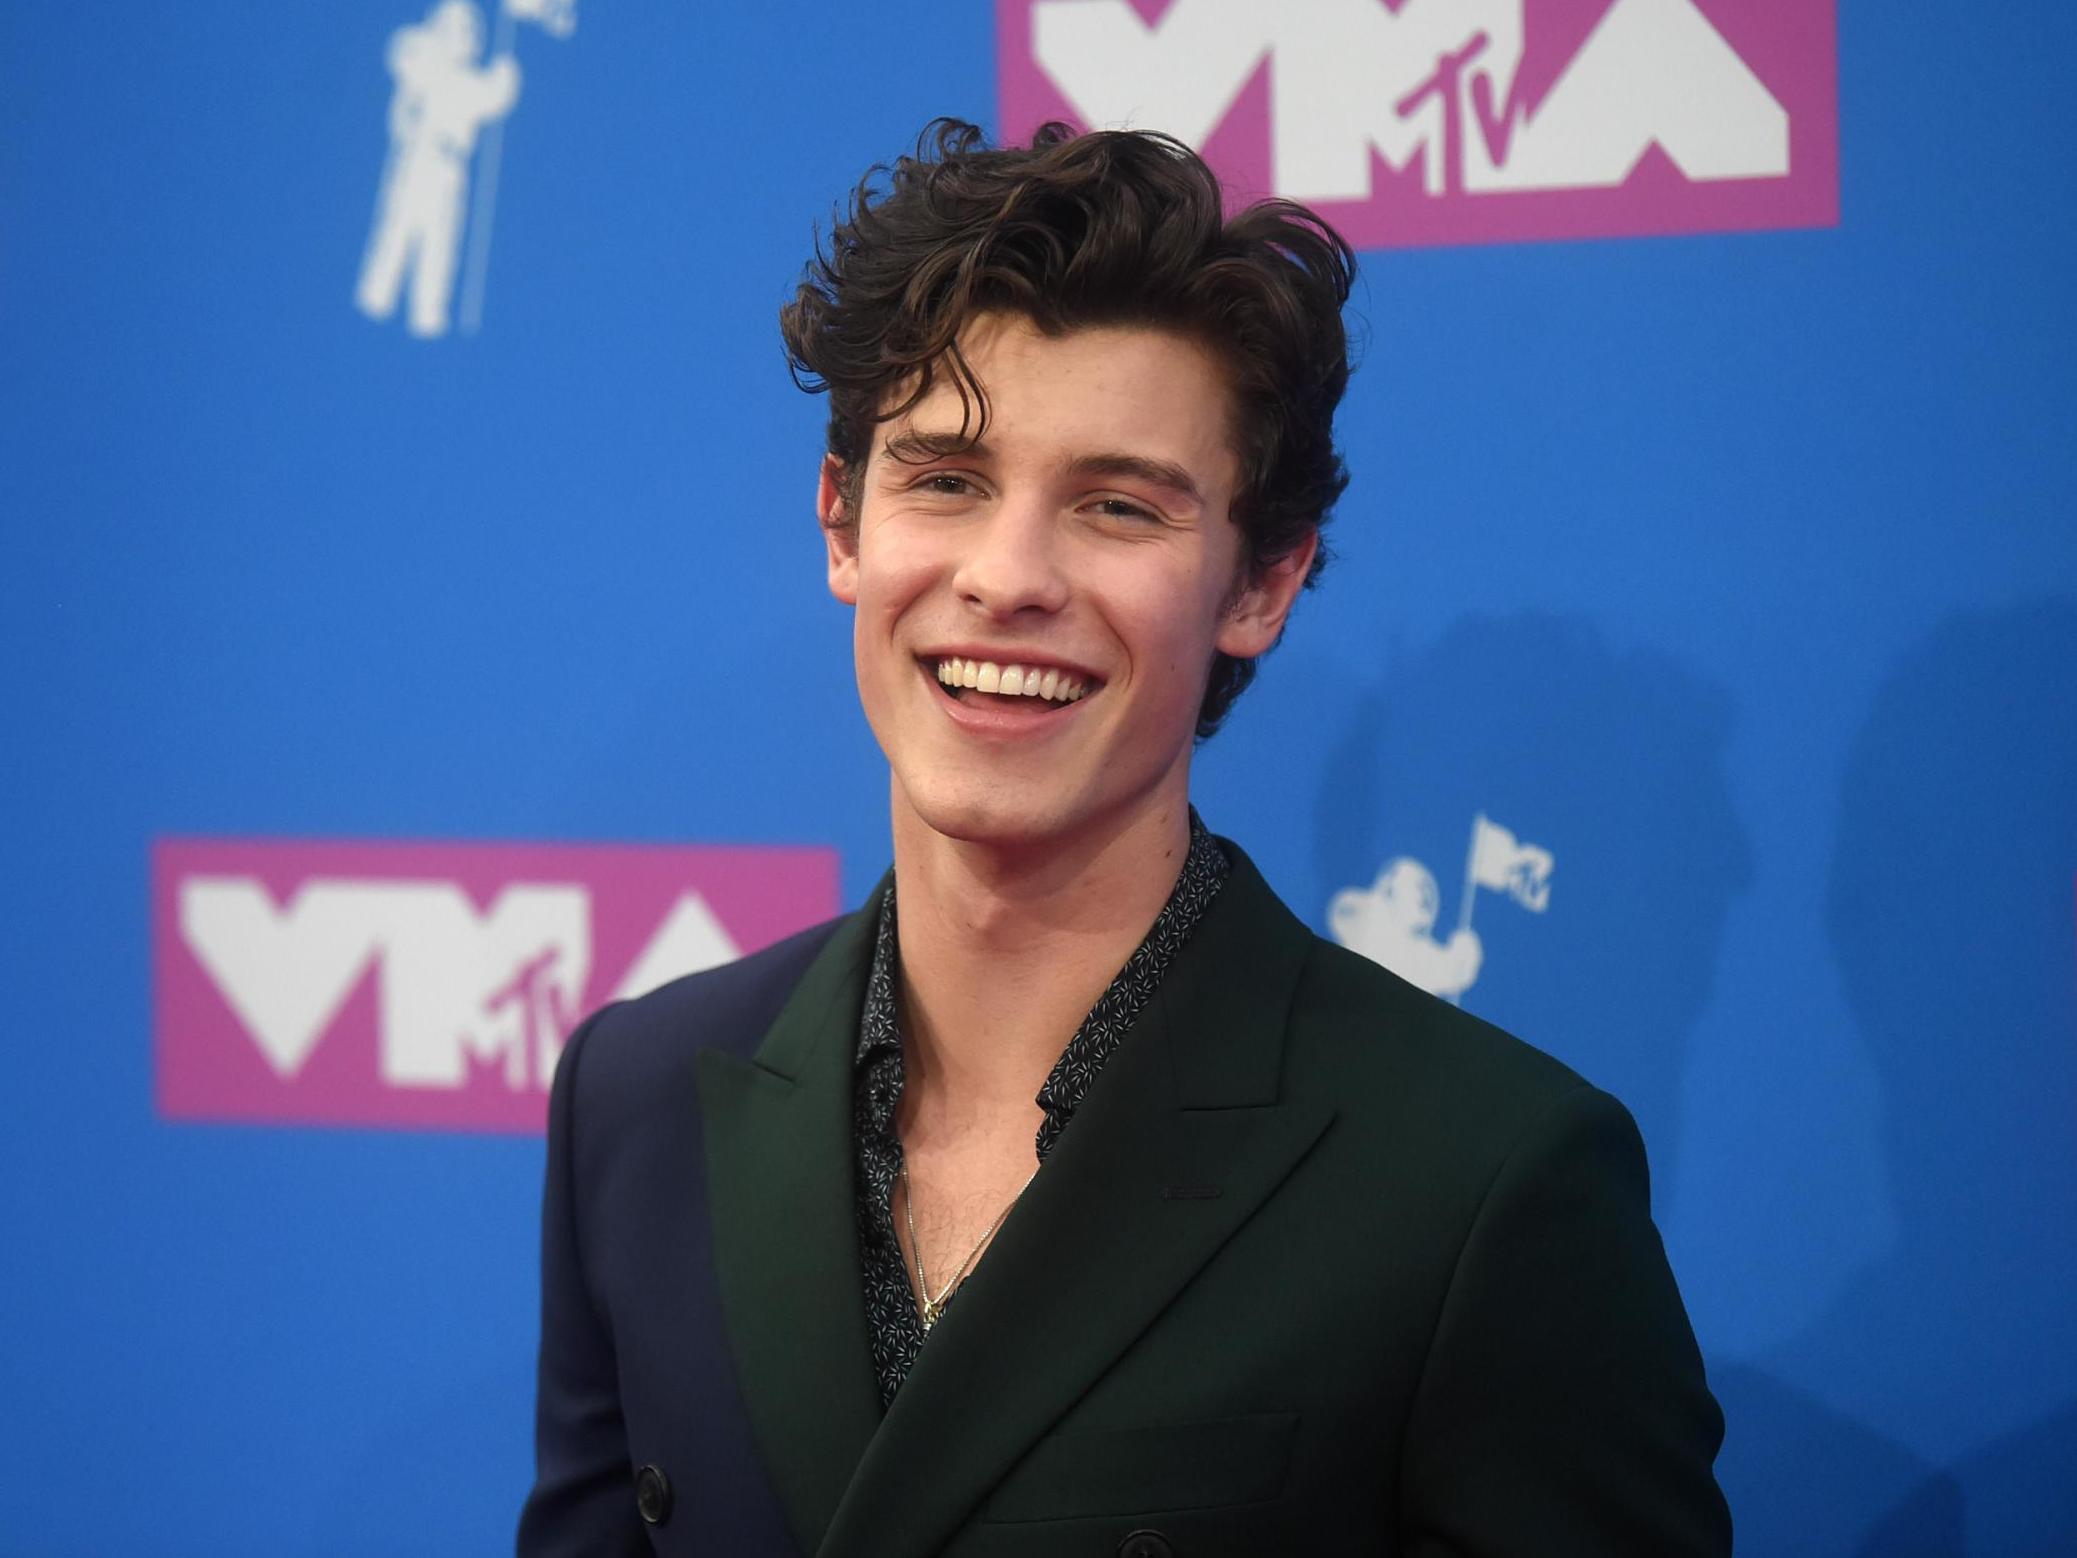 Shawn Mendes Short Wavy Black Hairstyle - Hairstyles